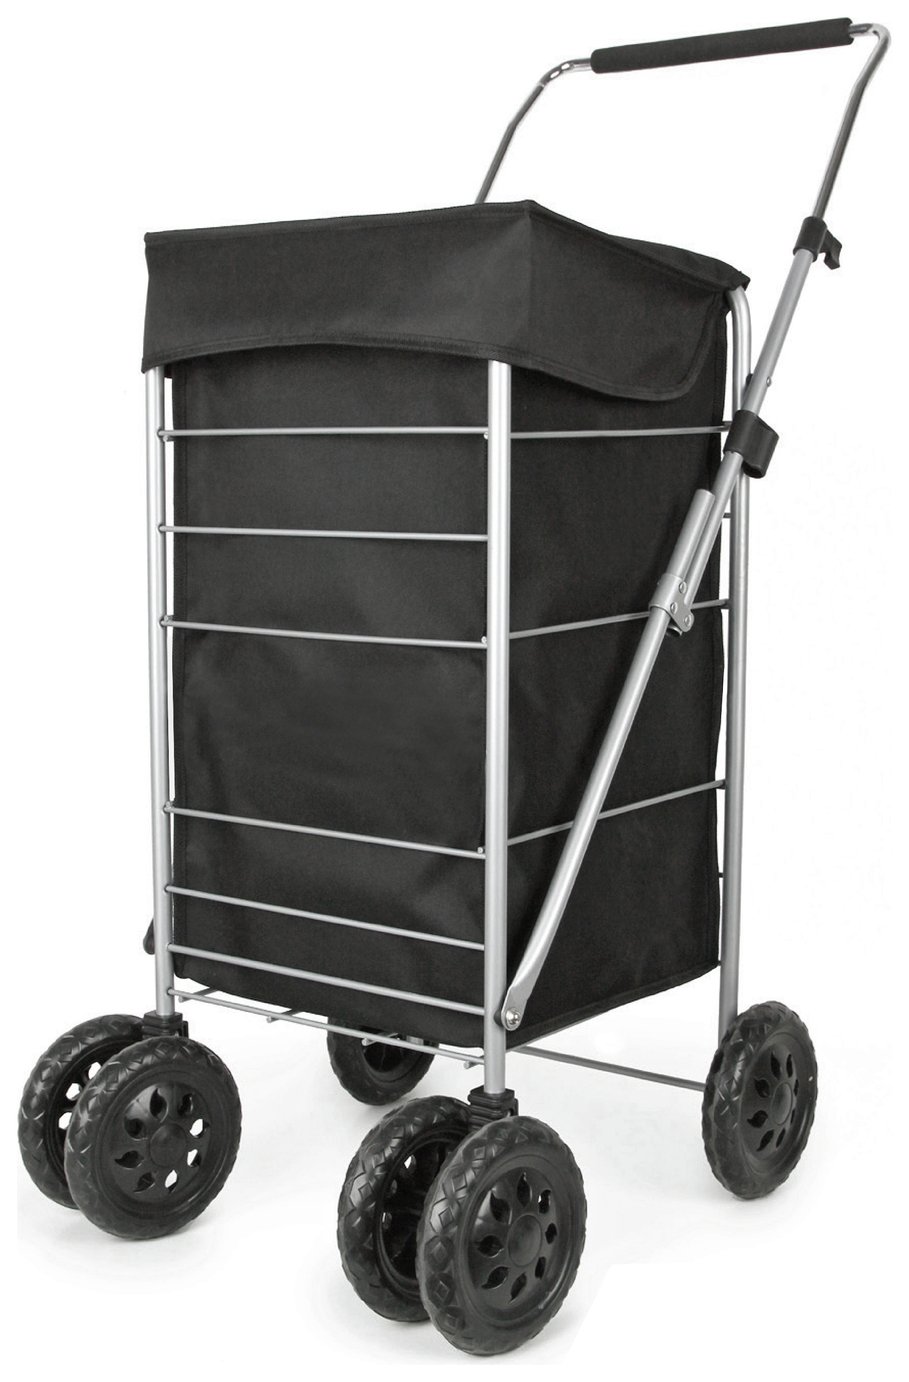 Deluxe 6 Wheel Shopping Trolley review